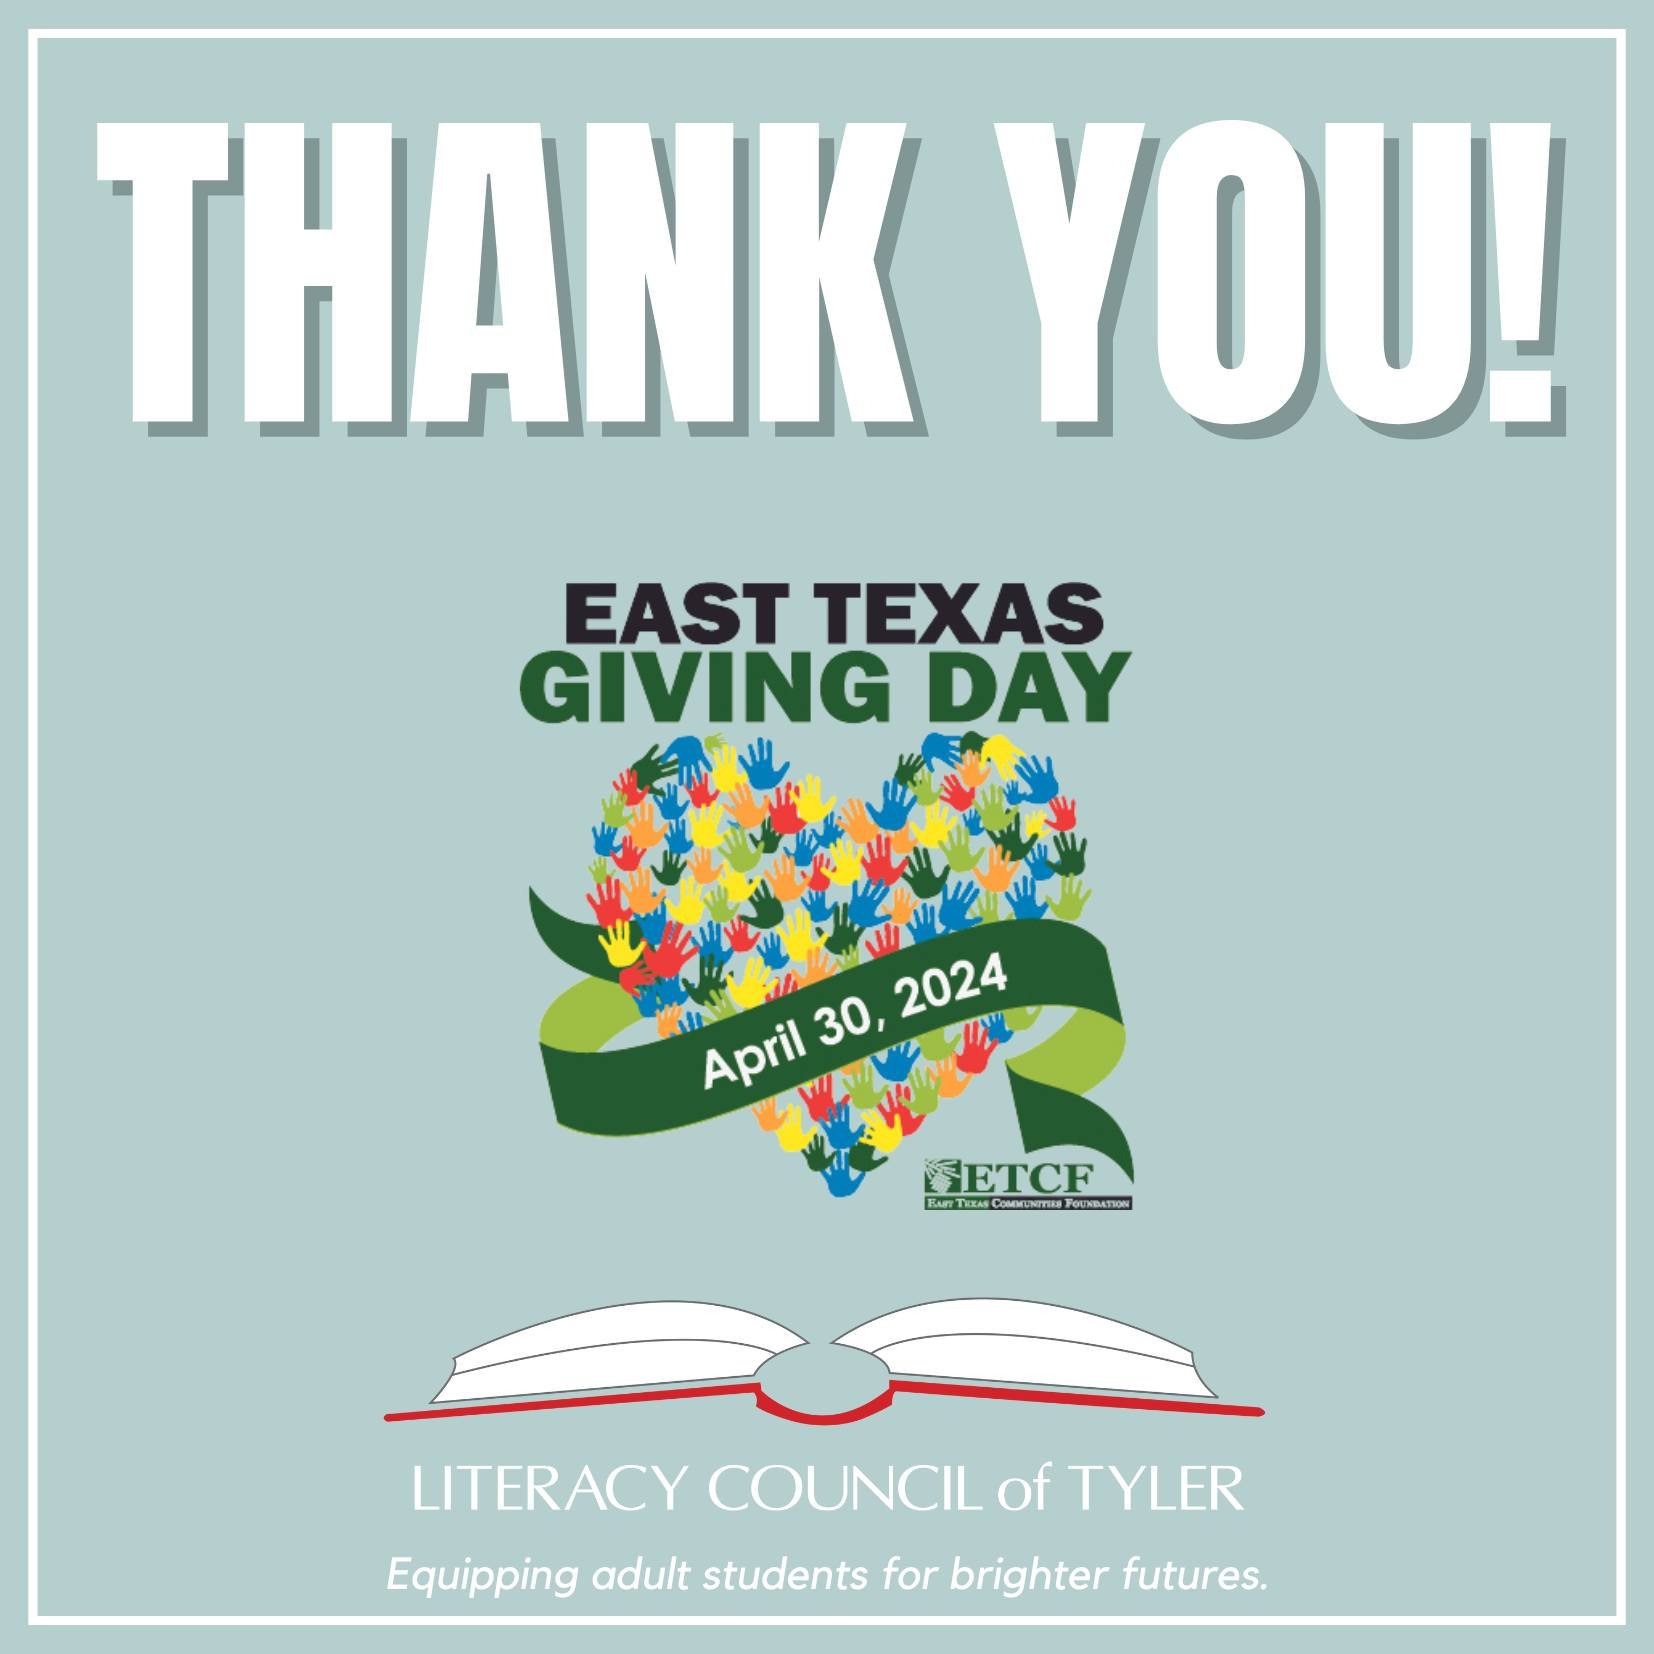 Thank you so much for your support on East Texas Giving Day!! Gifts from yesterday allow us to continue serving adult students in East Texas! #ETGD2024 

Want to learn more about Literacy Council of Tyler? Visit us at lcotyler.org or call 903-533-033